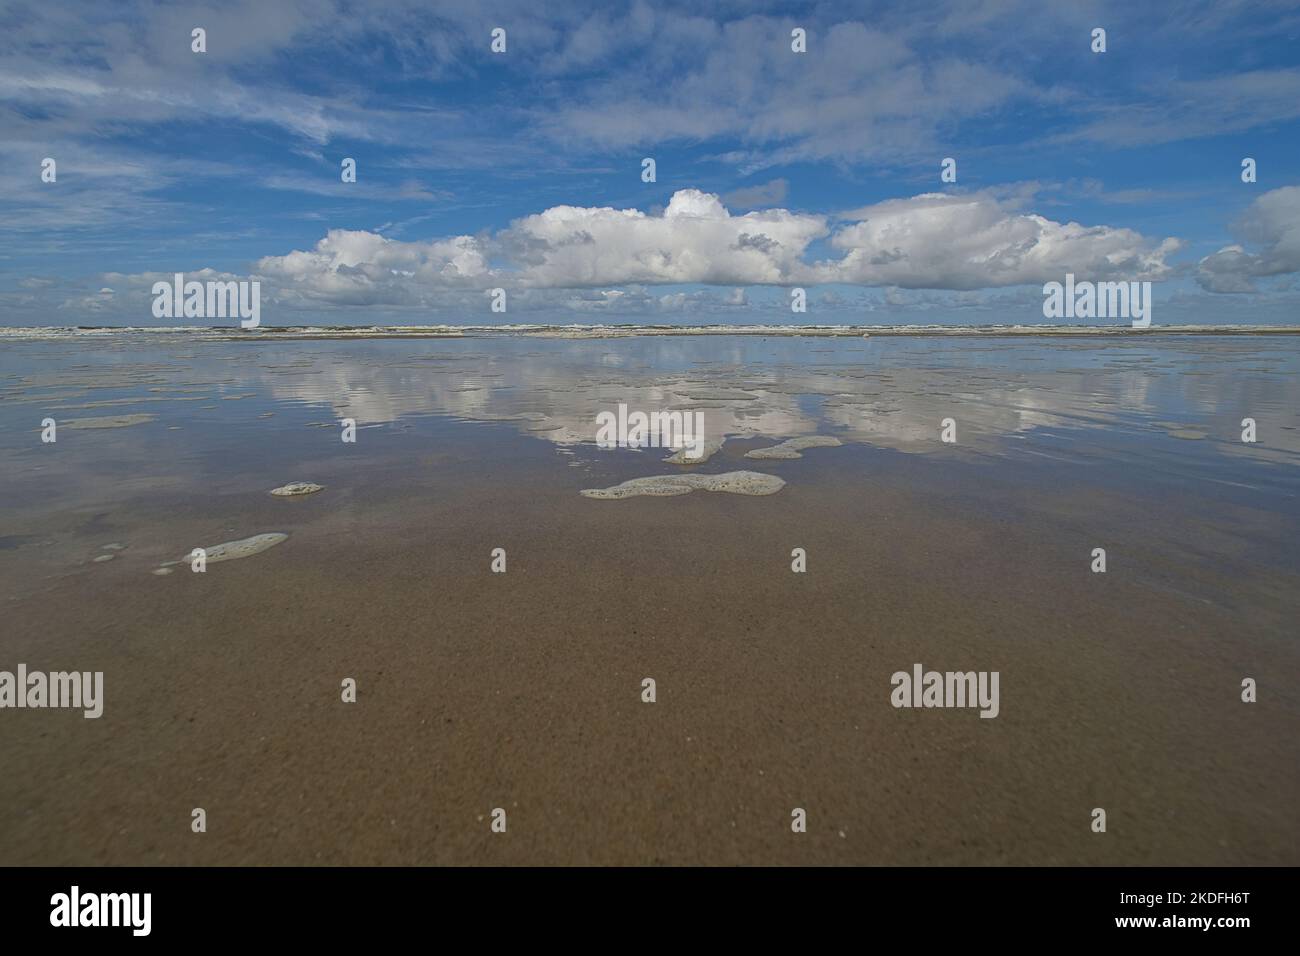 The clouds are reflected in the calm waters of the North Sea Stock Photo